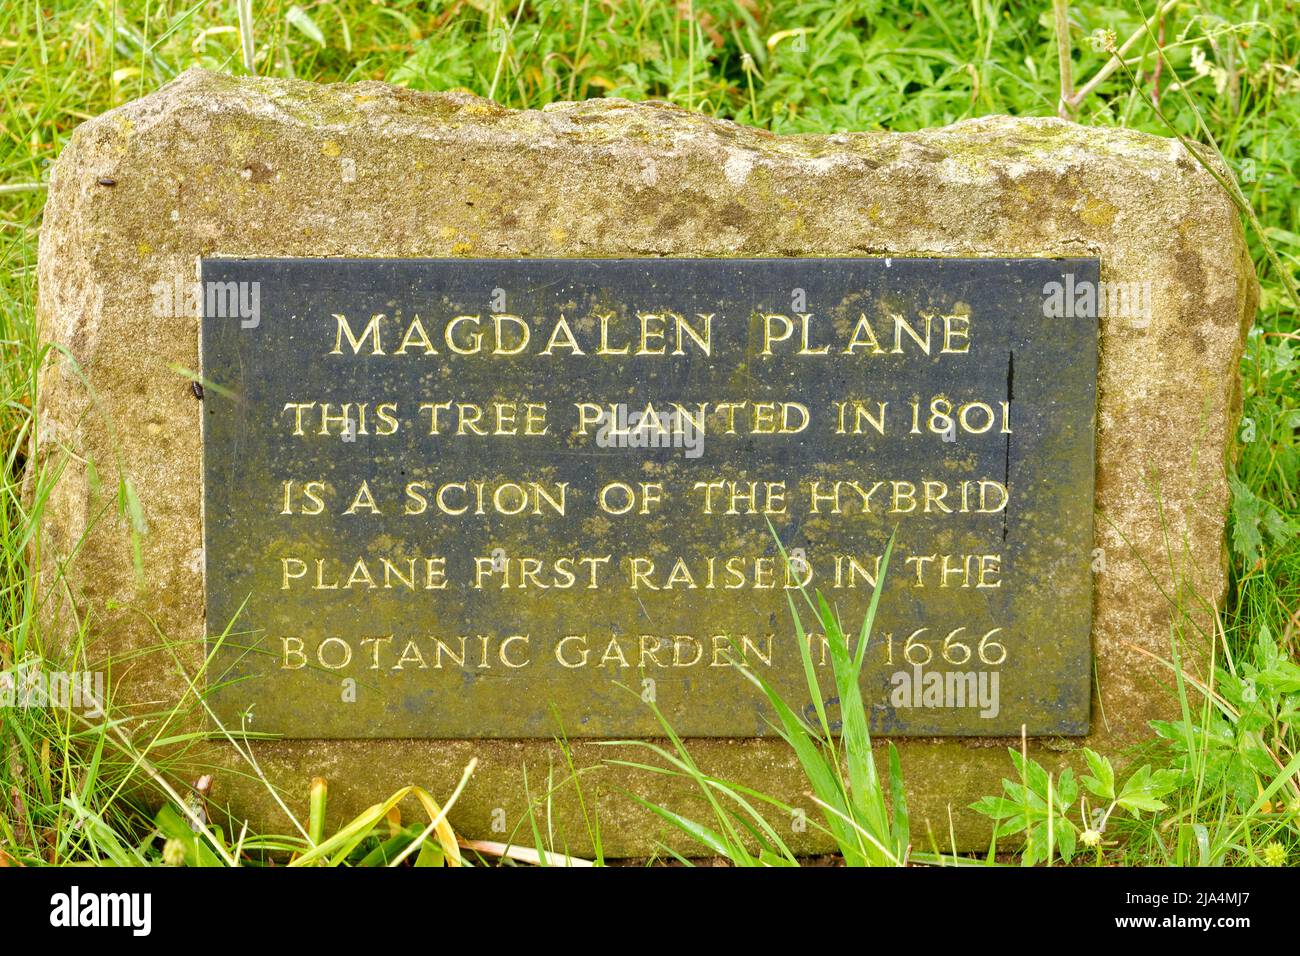 OXFORD CITY ENGLAND MAGDALEN COLLEGE INFORMATION PLAQUE FOR THE MAGDALEN PLANE TREE Stock Photo